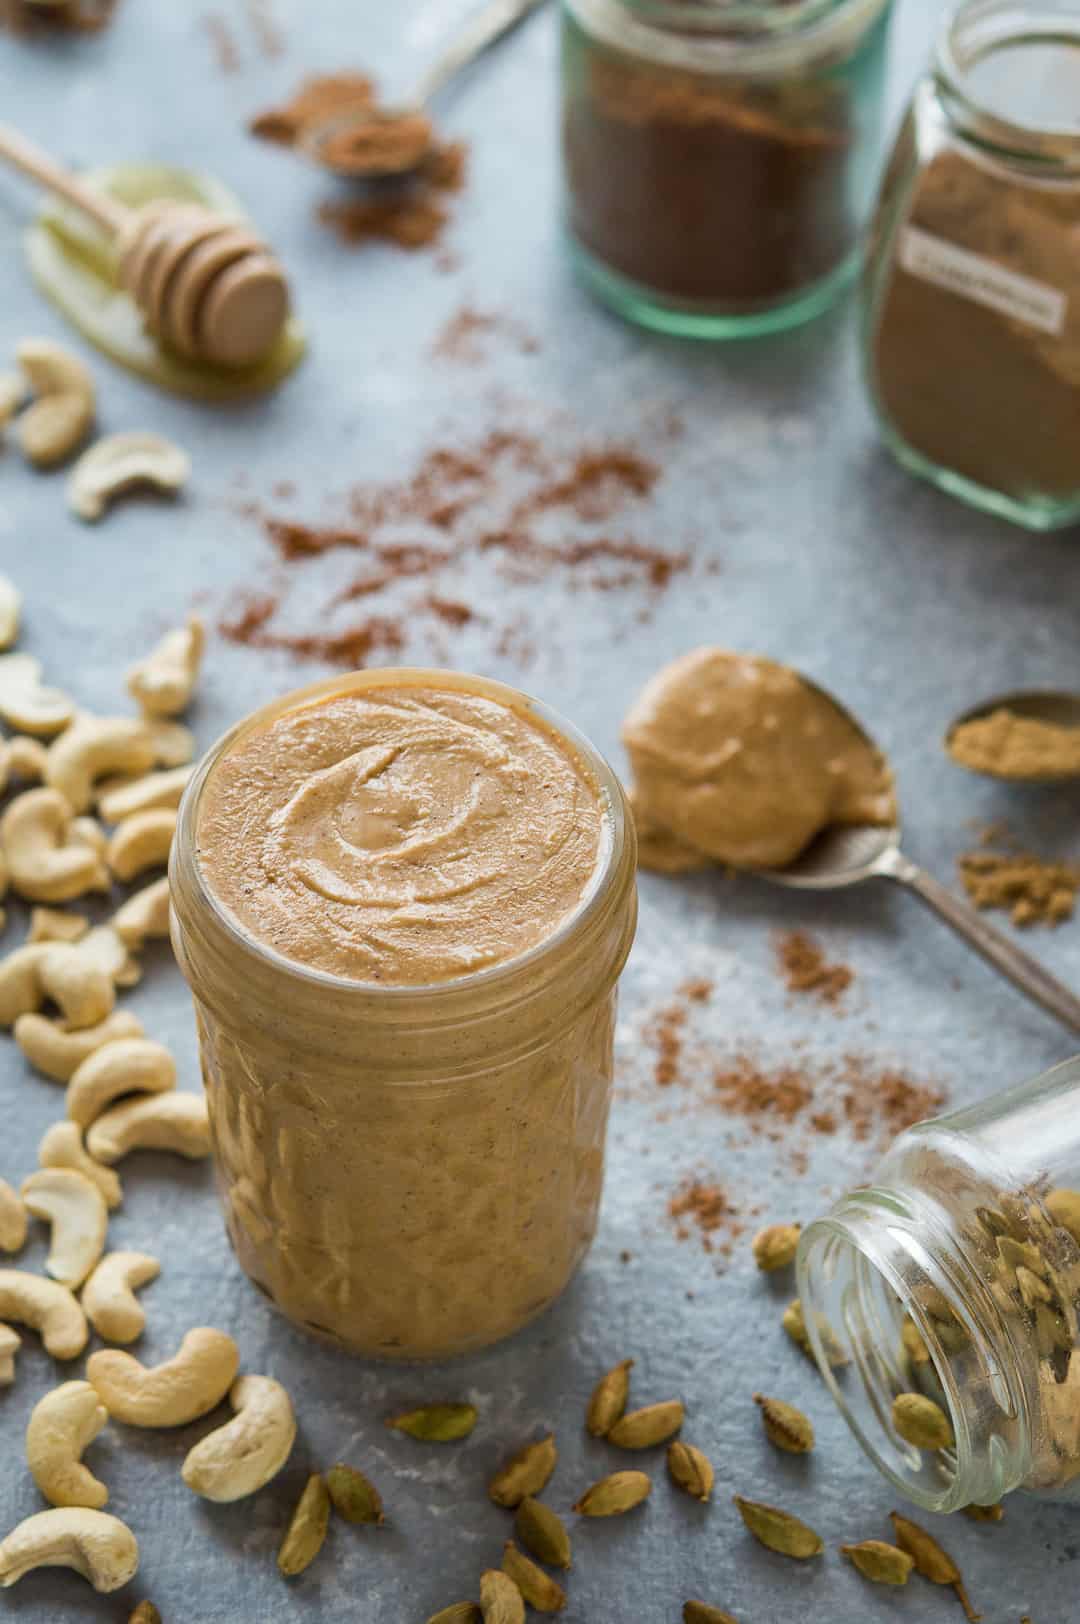 Chai spiced cashew nut butter - smooth, creamy and addictive!